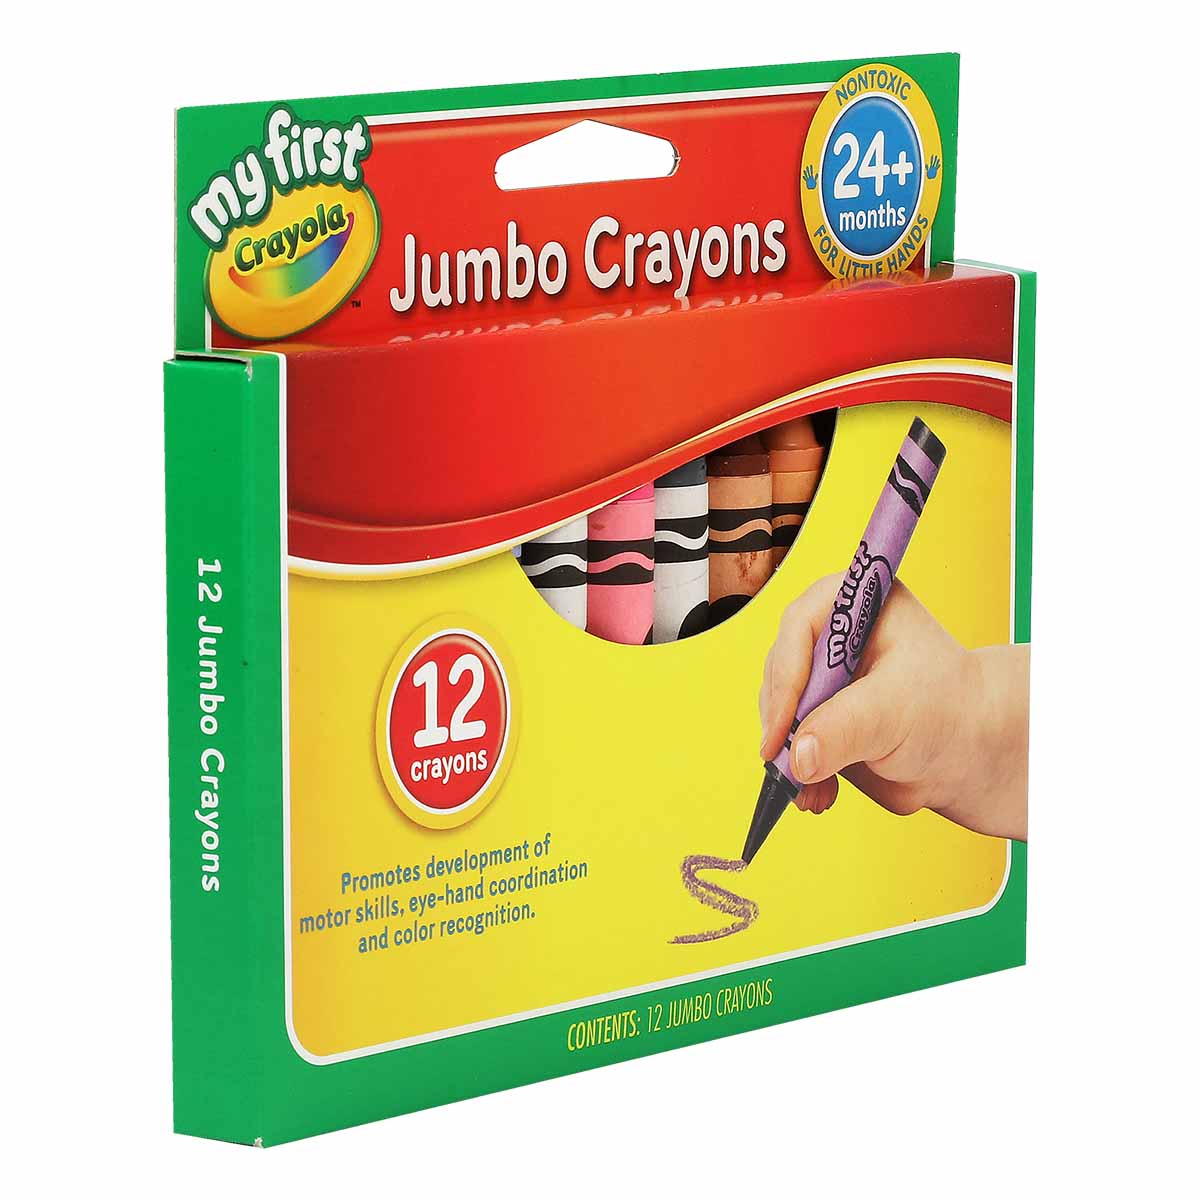 Why not to buy jumbo crayons for your childwhat parents should know